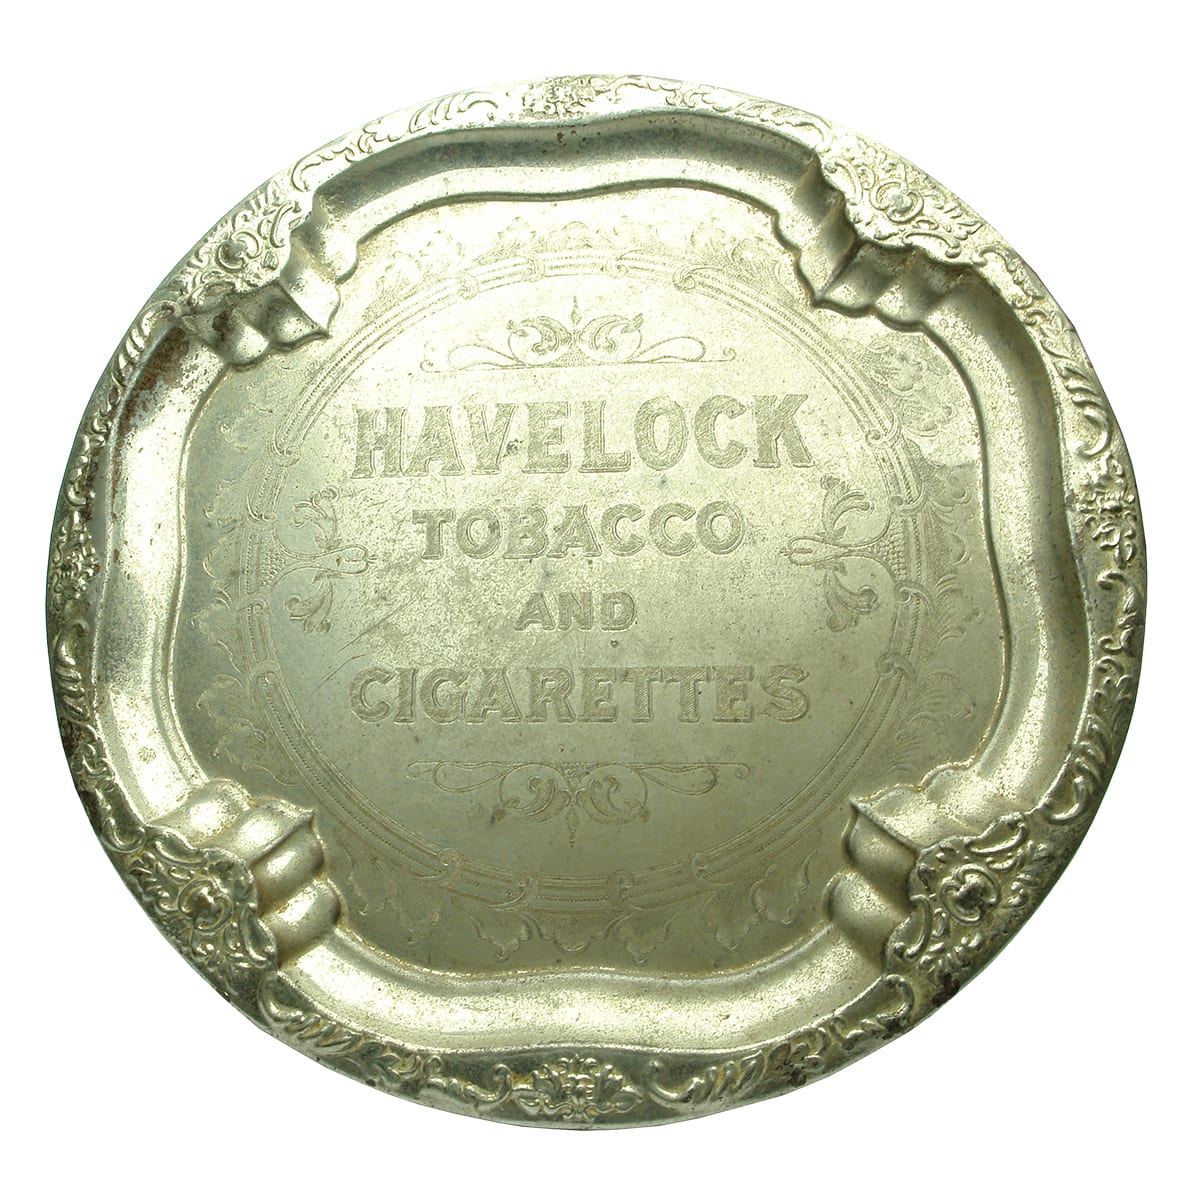 Serving Tray. Havelock Tobacco and Cigarettes.